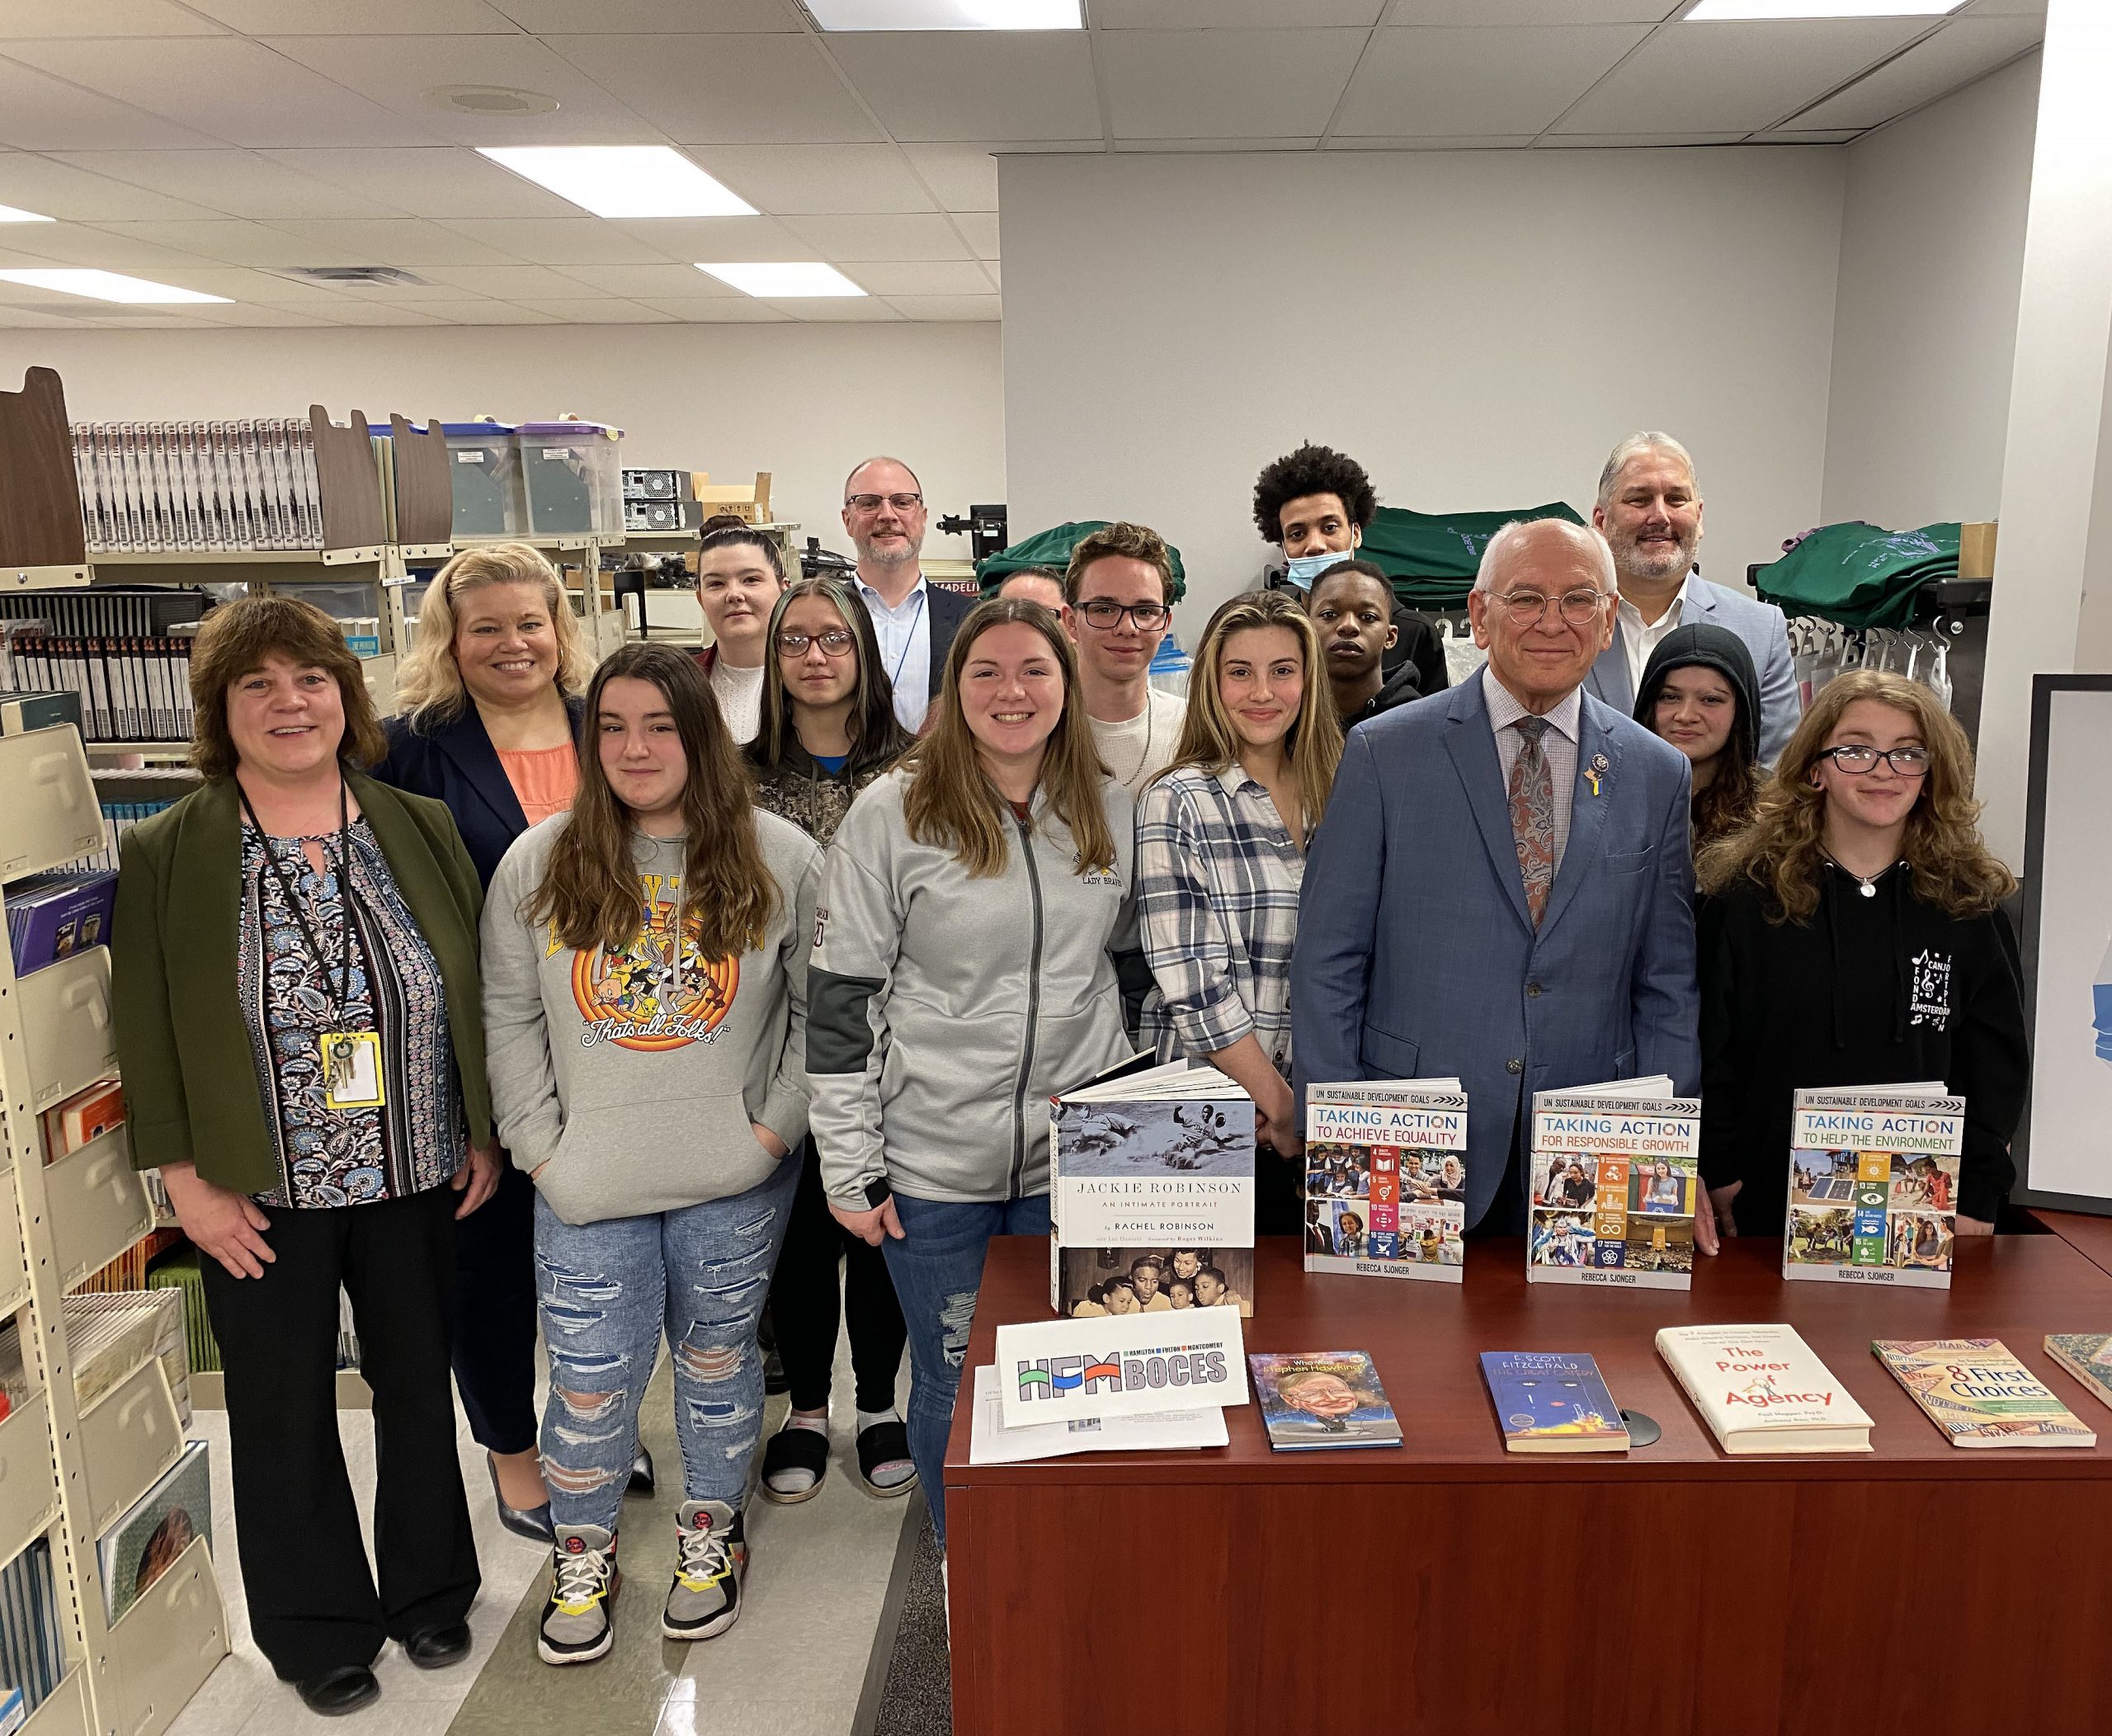 Tonko poses for a group shot with students and administrators